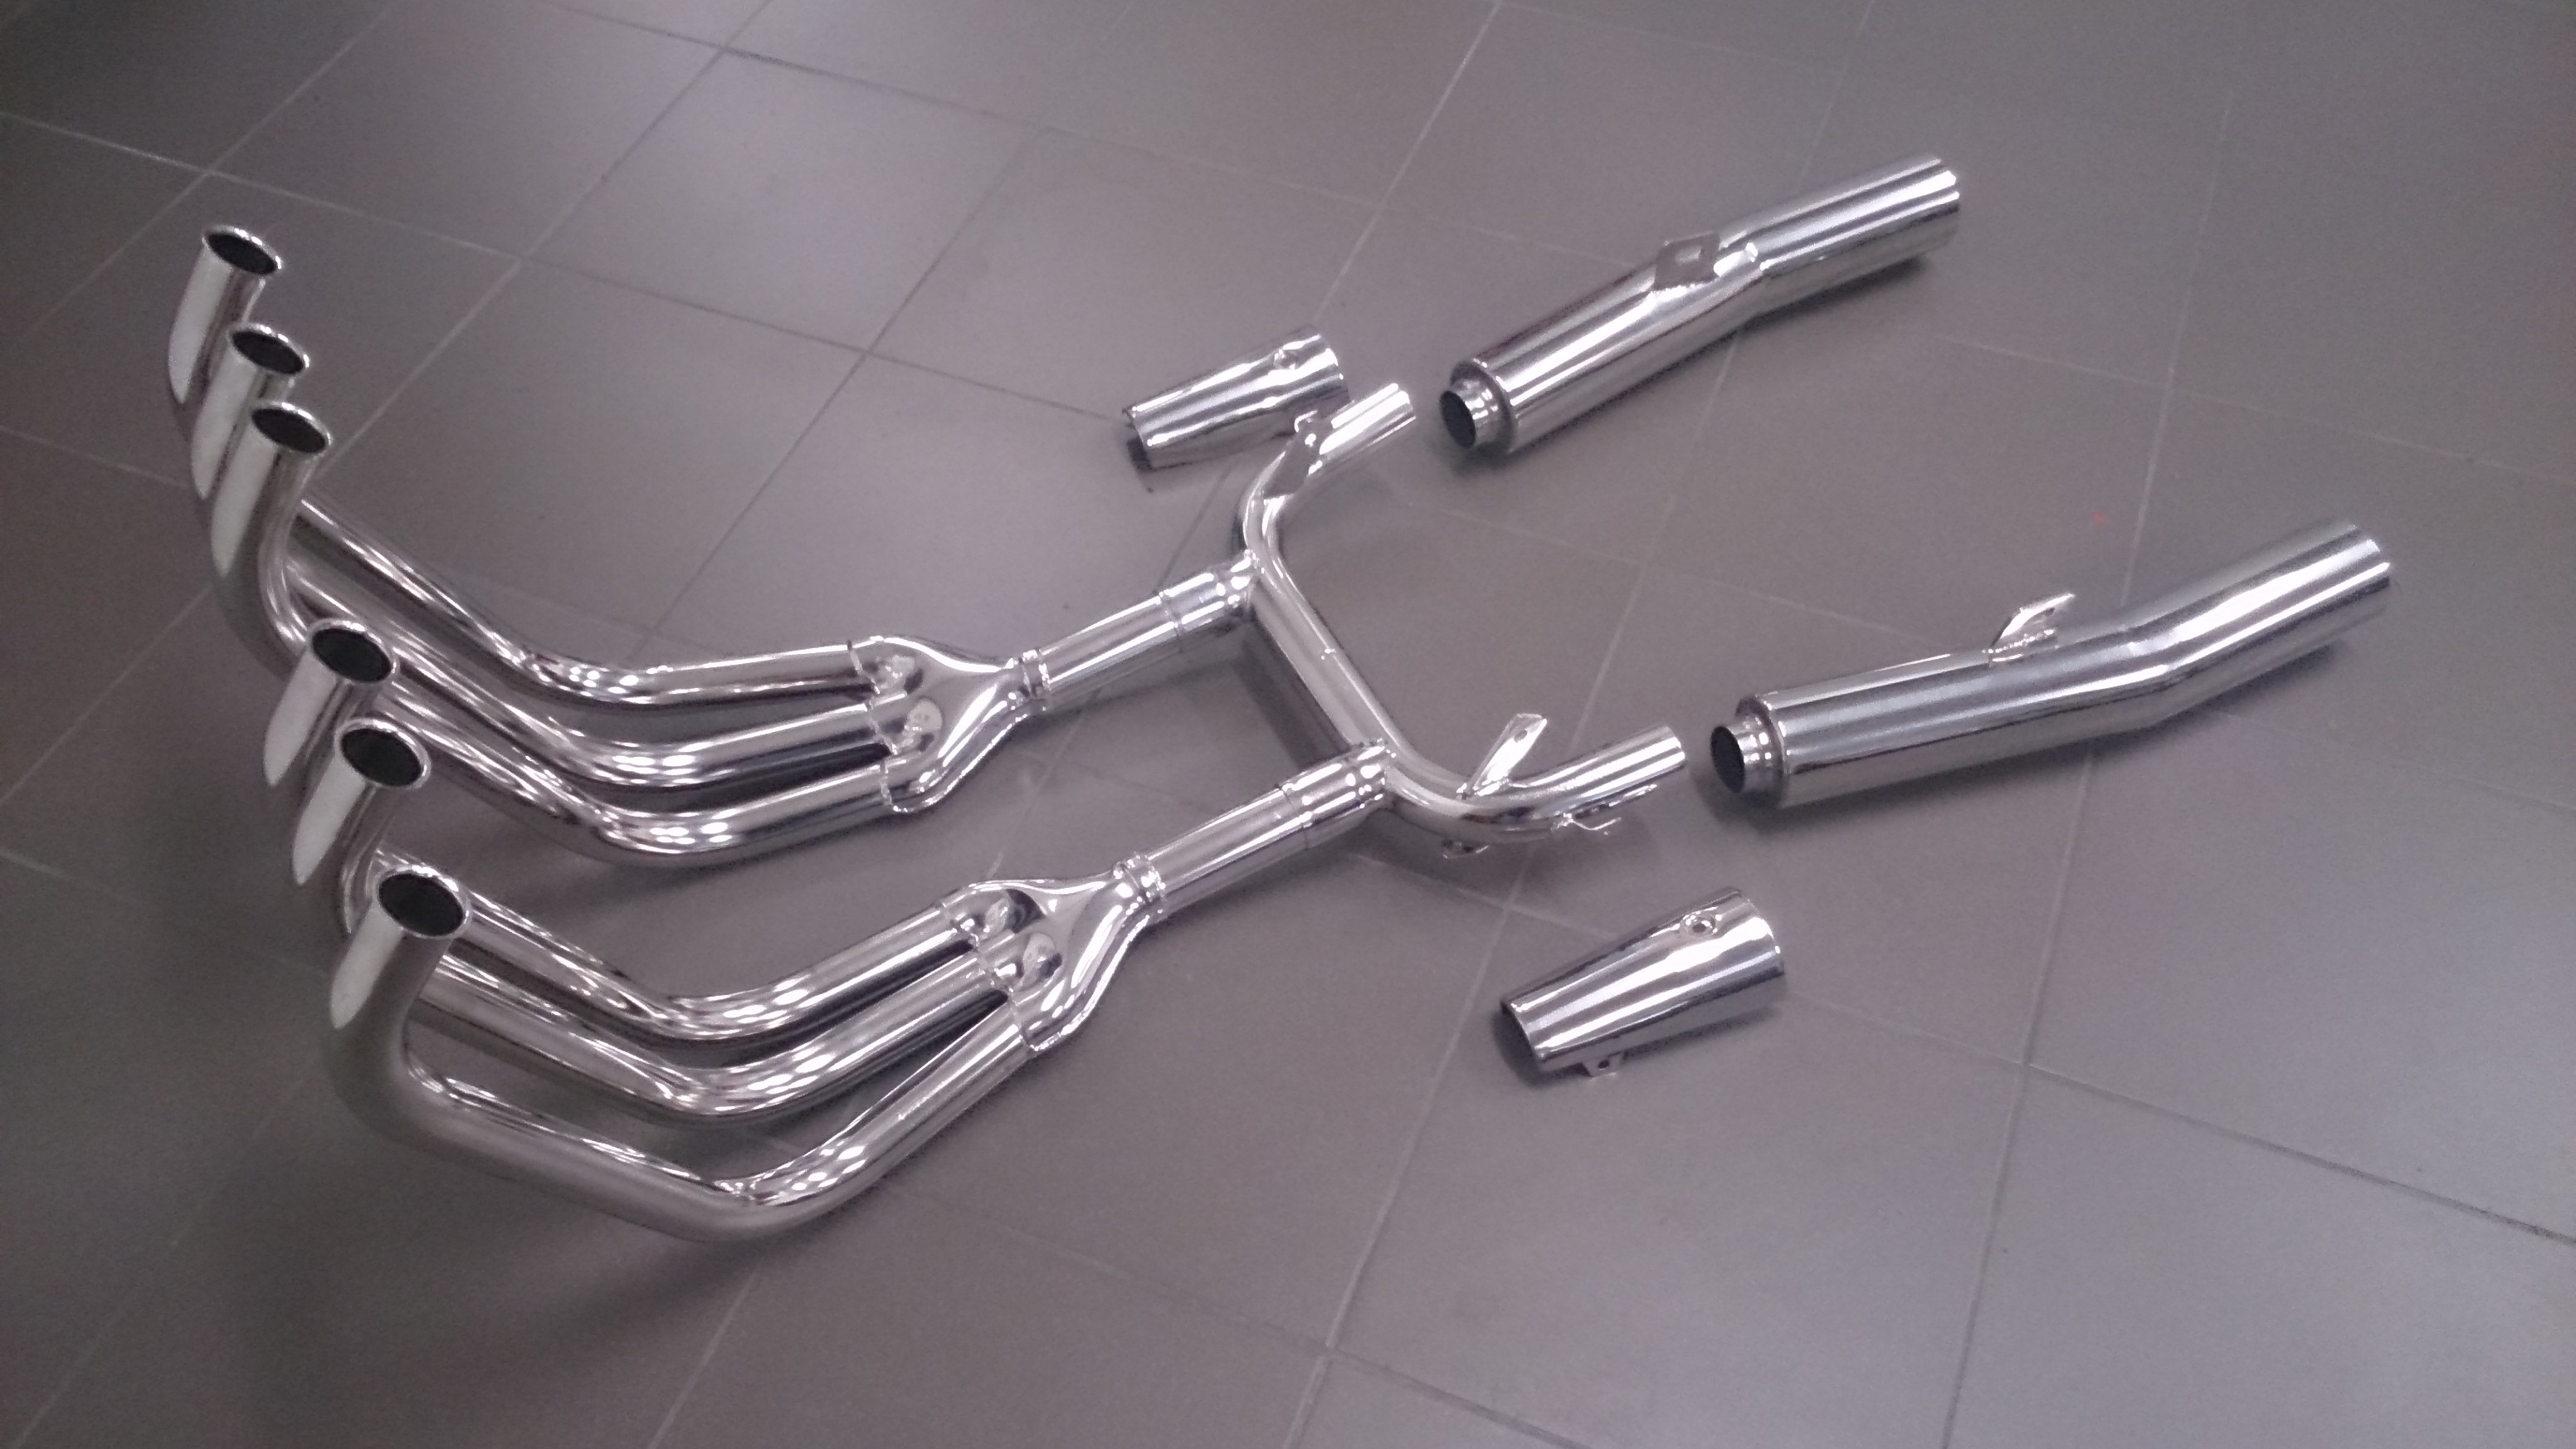 Sport exhaust system - with sport mufflers